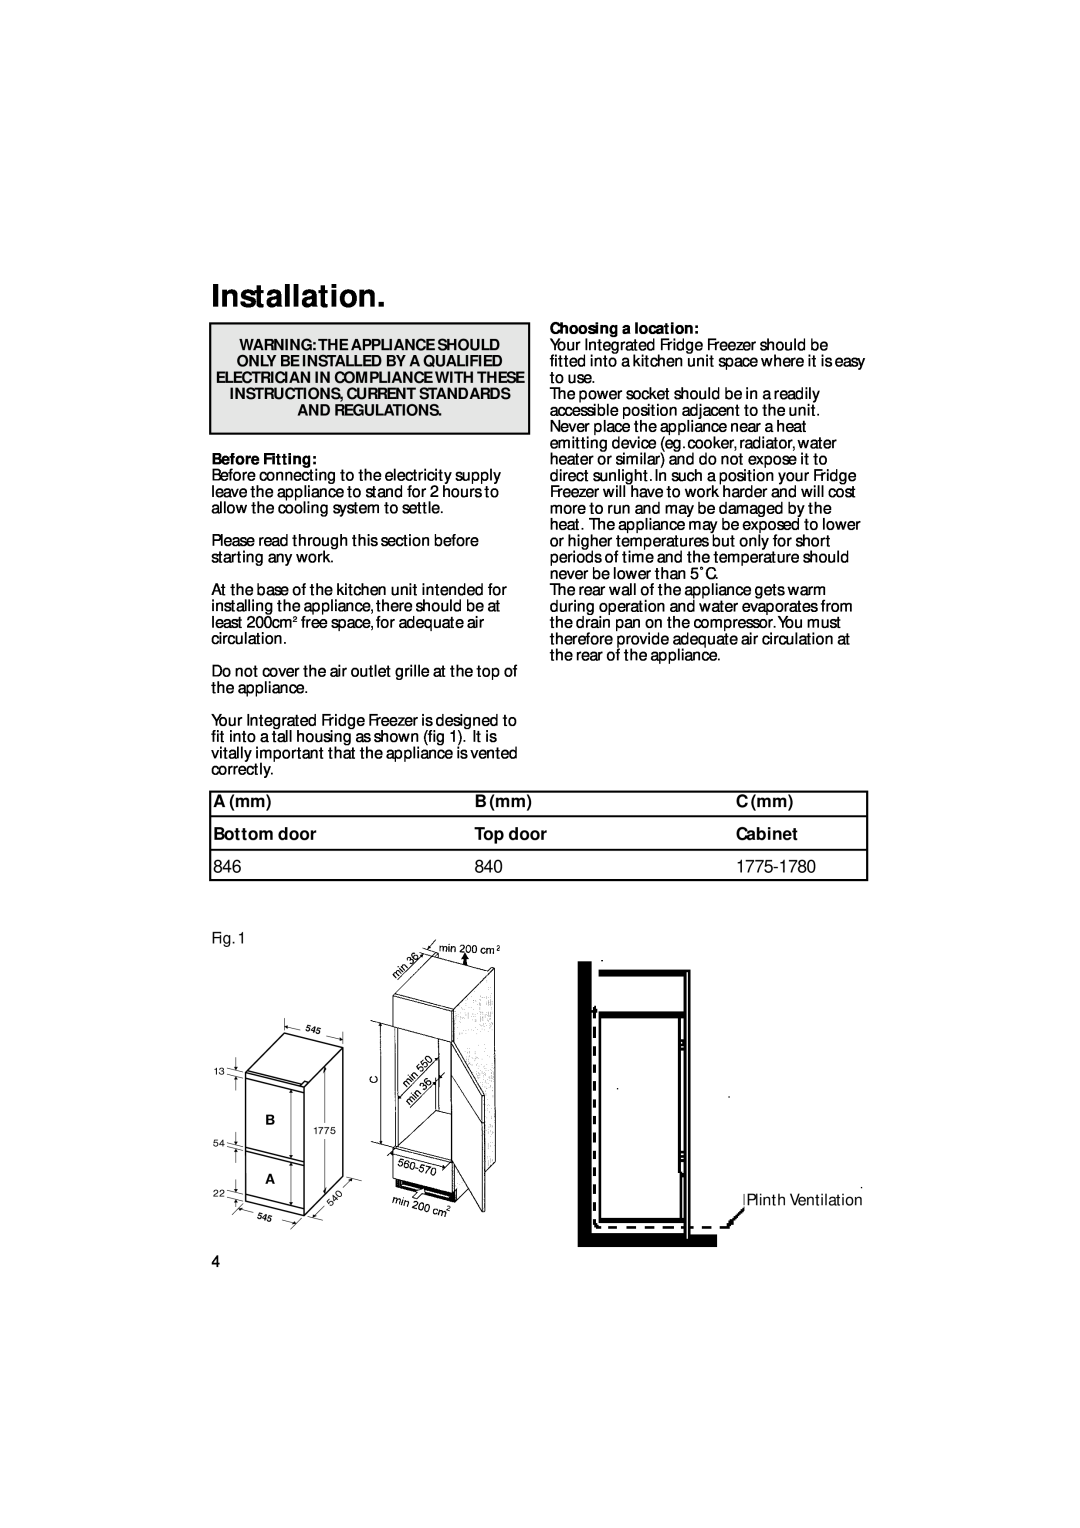 Hotpoint HM311i manual Installation, A mm, B mm, C mm, Bottom door, Top door, Cabinet, 1775-1780, Before Fitting 